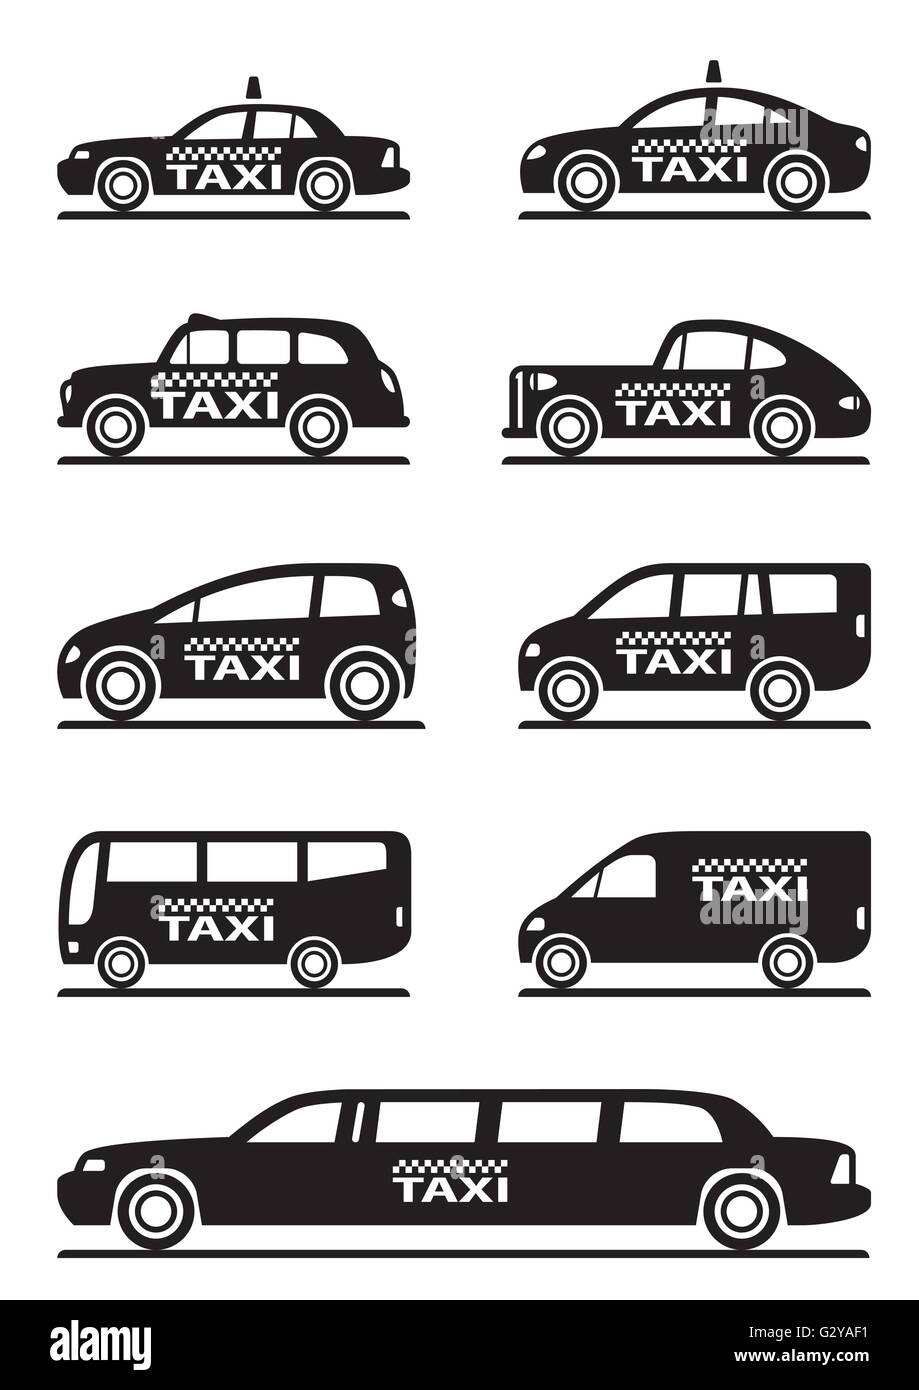 Different types of taxi cars - vector illustration Stock Vector